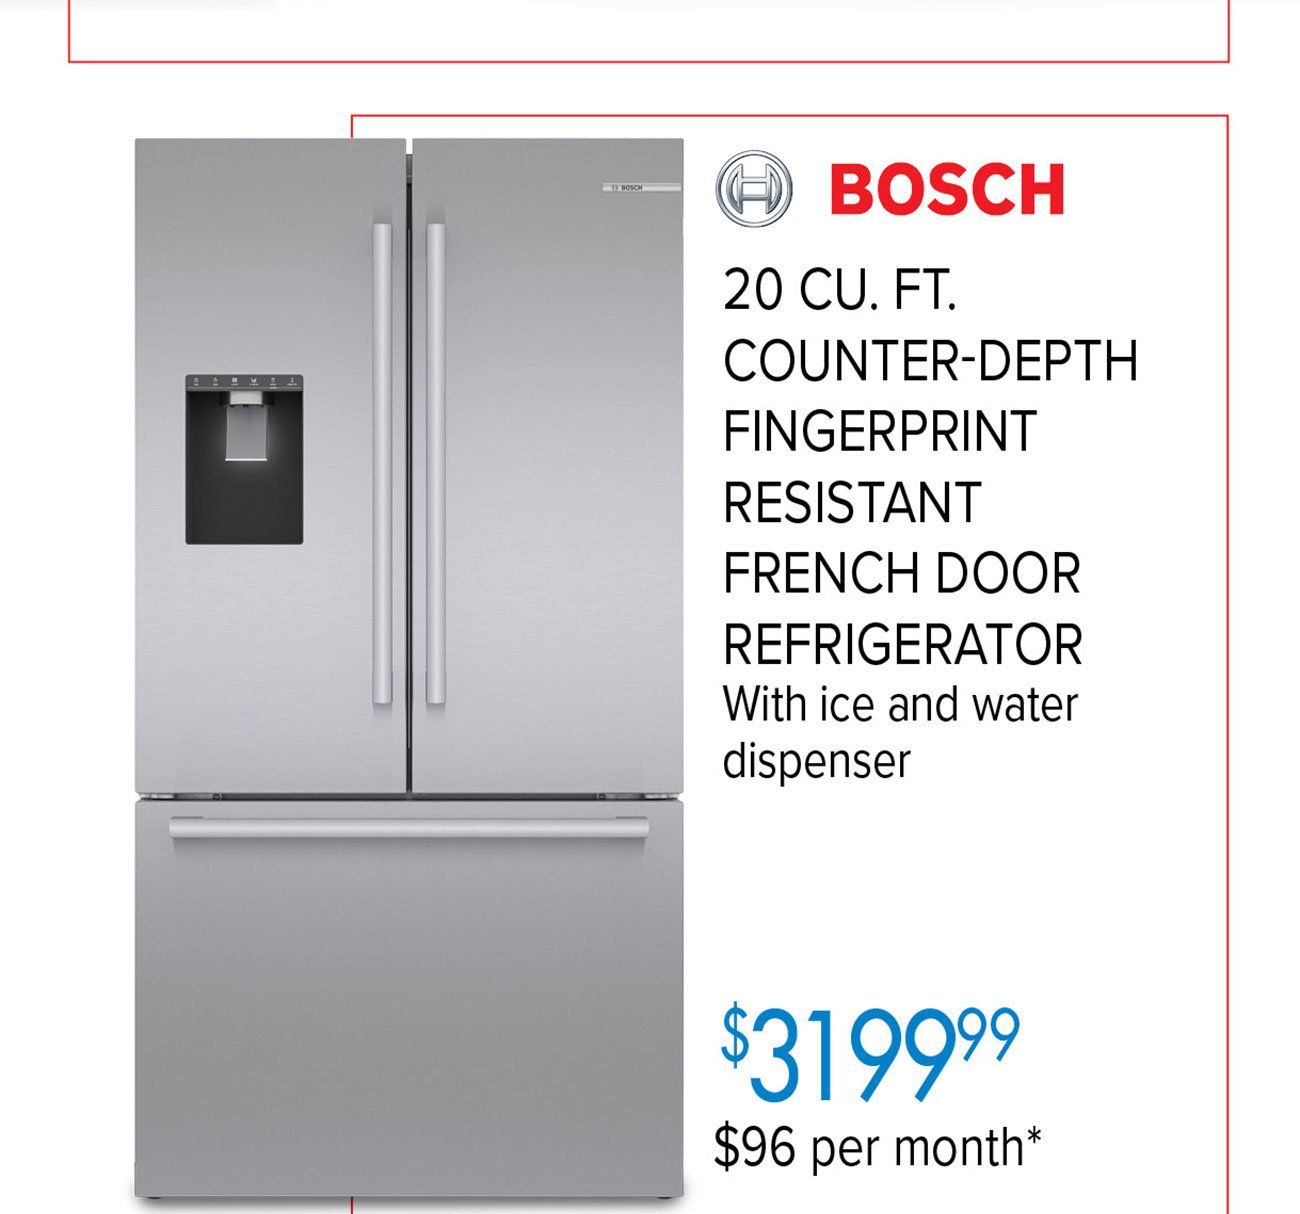 BOSCH 20 CU; FT; COUNTER-DEPTH FINGERPRINT RESISTANT FRENCH DOOR REFRIGERATOR With ice and water dispenser 131997 $96 per month* 